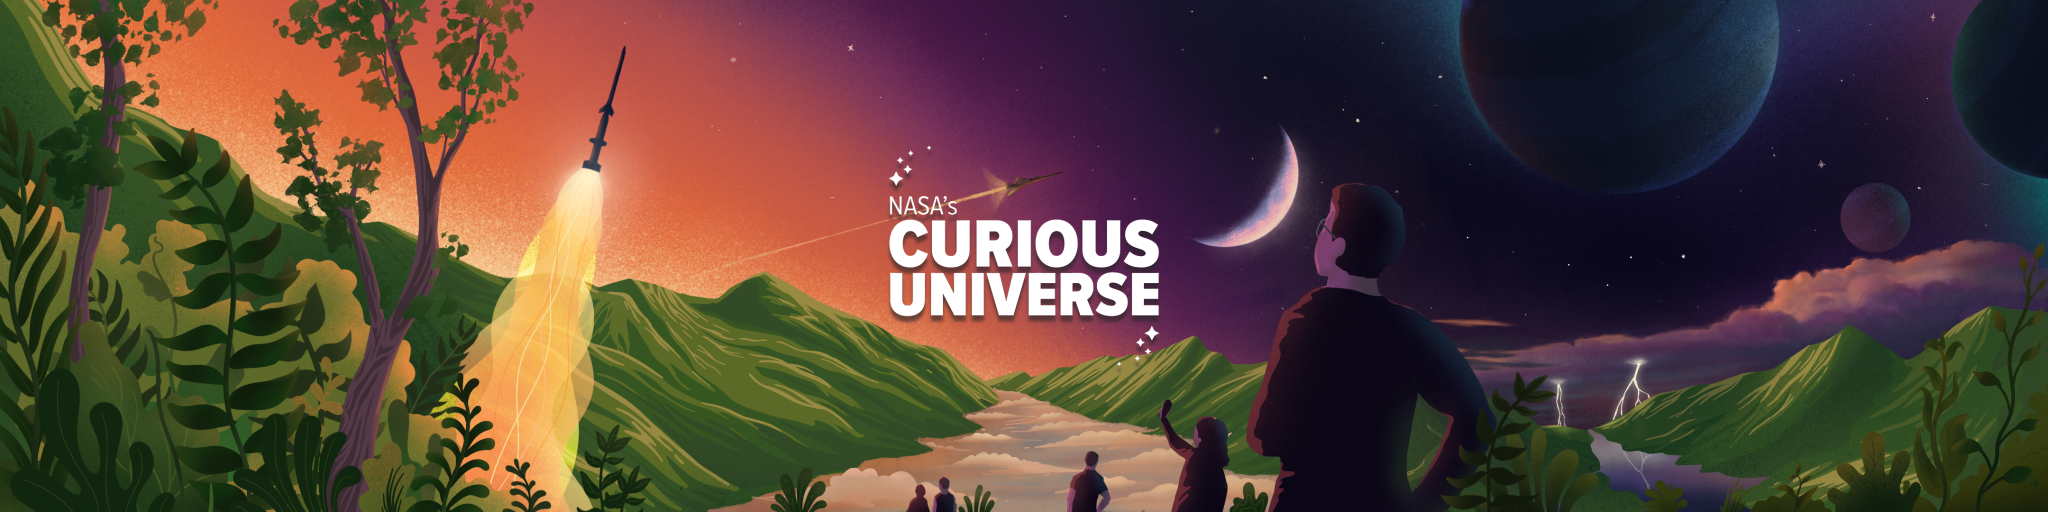 A graphic that has the words "NASA's Curious Universe" in the center in white letters. On the left, there are trees and hills against an orange sky. There is also a depiction of a sounding rocket taking off. In the center, NASA's X59 aircraft is depicted, which is a narrow plane with a long nose. People from behind are depicted looking at the sky in the bottom center. One person is holding a phone as if they are taking a photo of the sky. A waxing crescent Moon is shown to the right of the Curious Universe logo. Three exoplanets of various sizes are shown in the sky on the right. The sky goes from orange on the left to purple on the right. There are hills in the bottom right with lightning depicted in the distance.